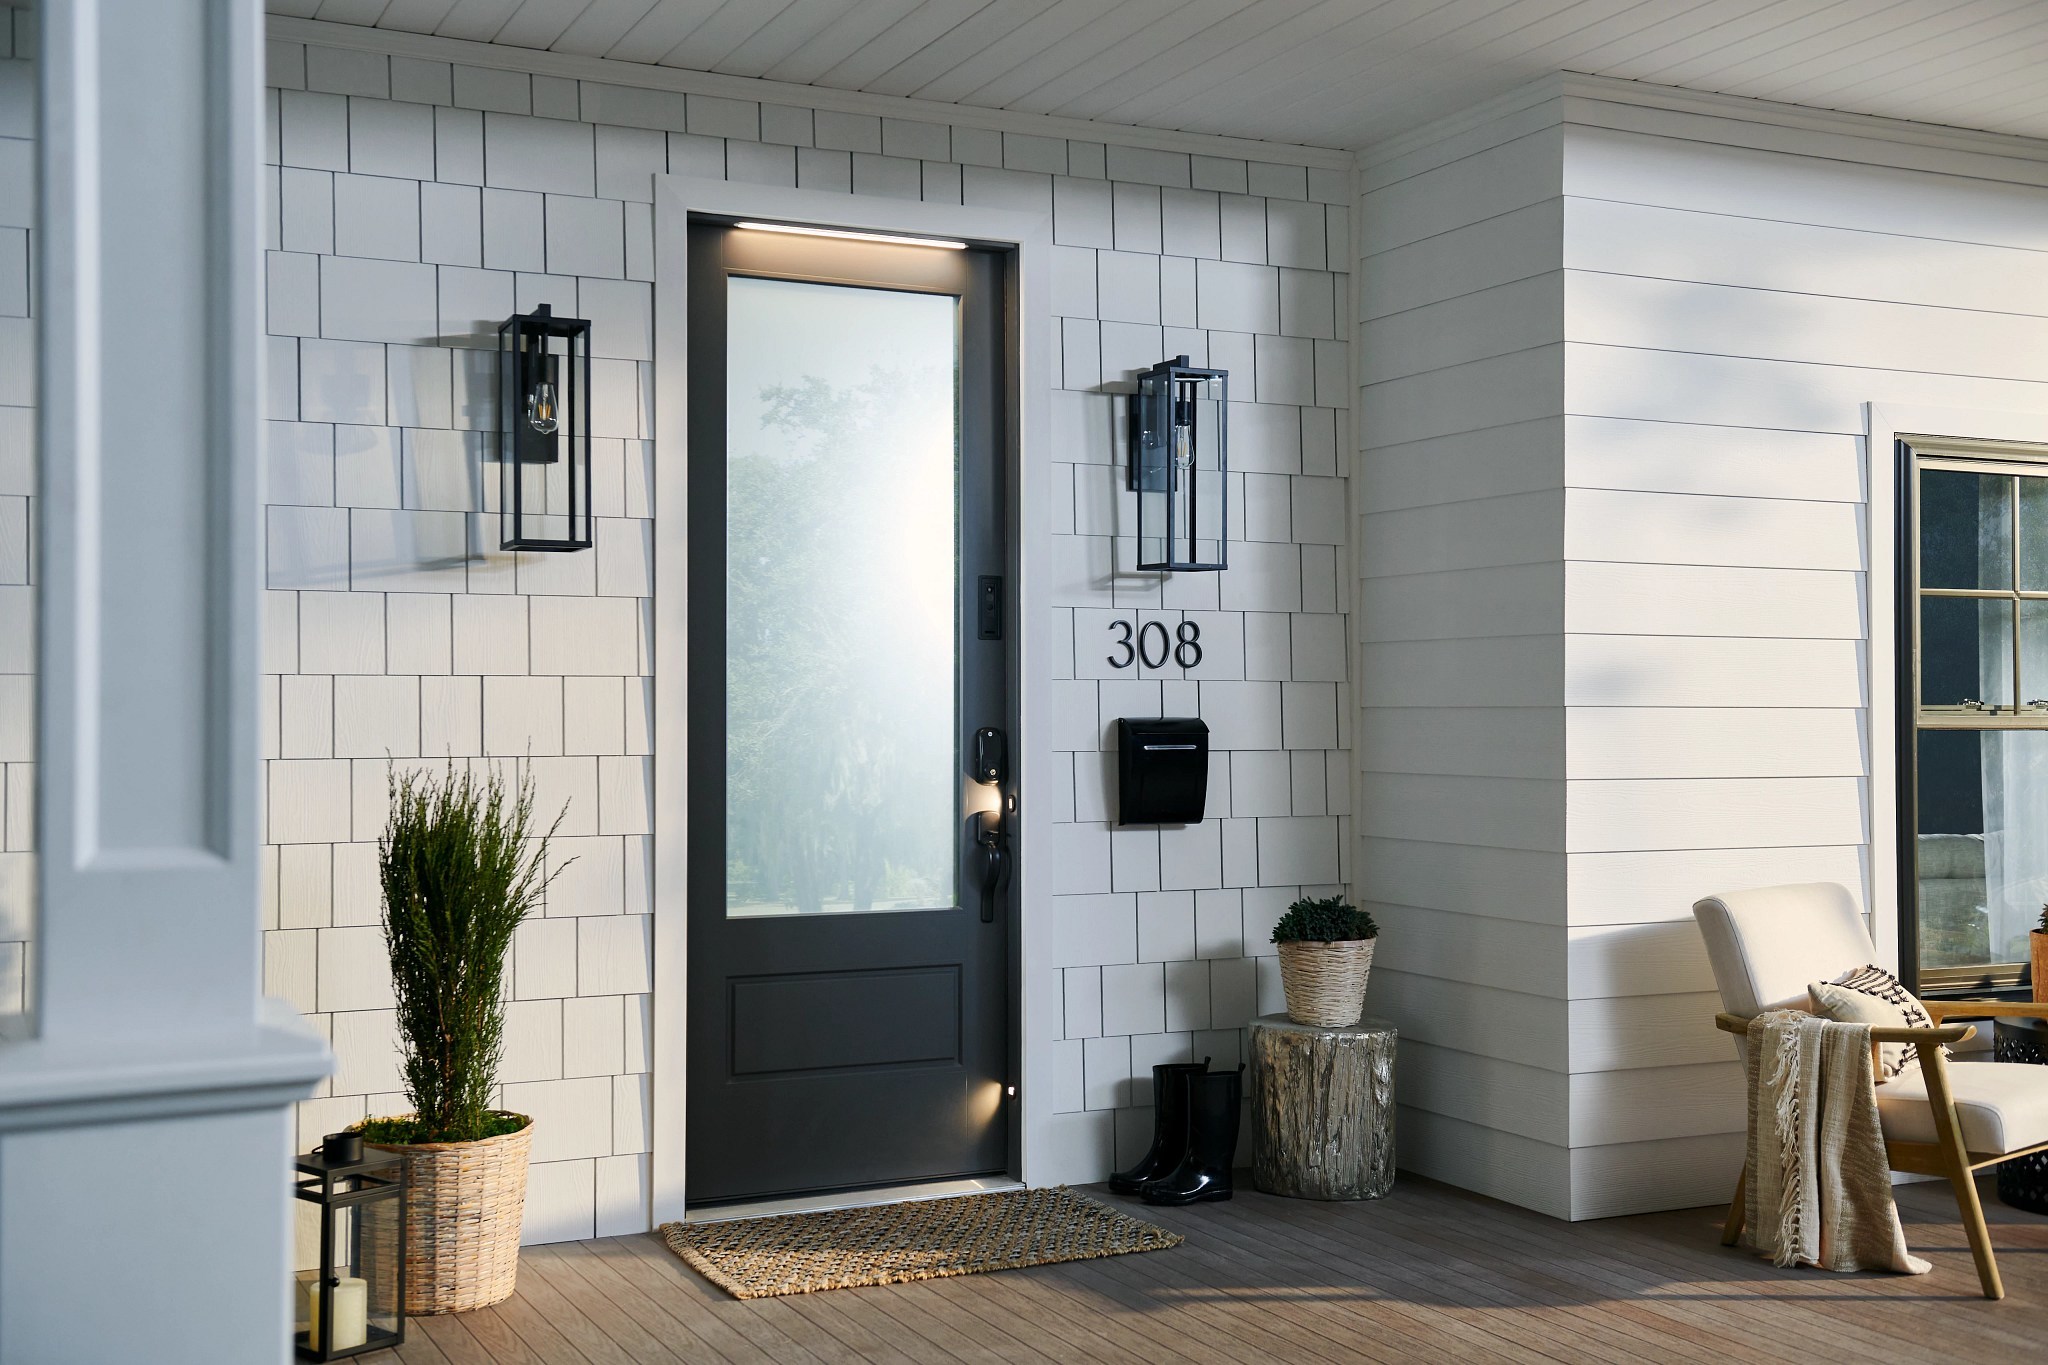 Masonite International Corporation (NYSE: DOOR), a leading global designer, manufacturer, marketer and distributor of interior and exterior doors, unveils the Masonite M-Pwr Smart Doors, the first res